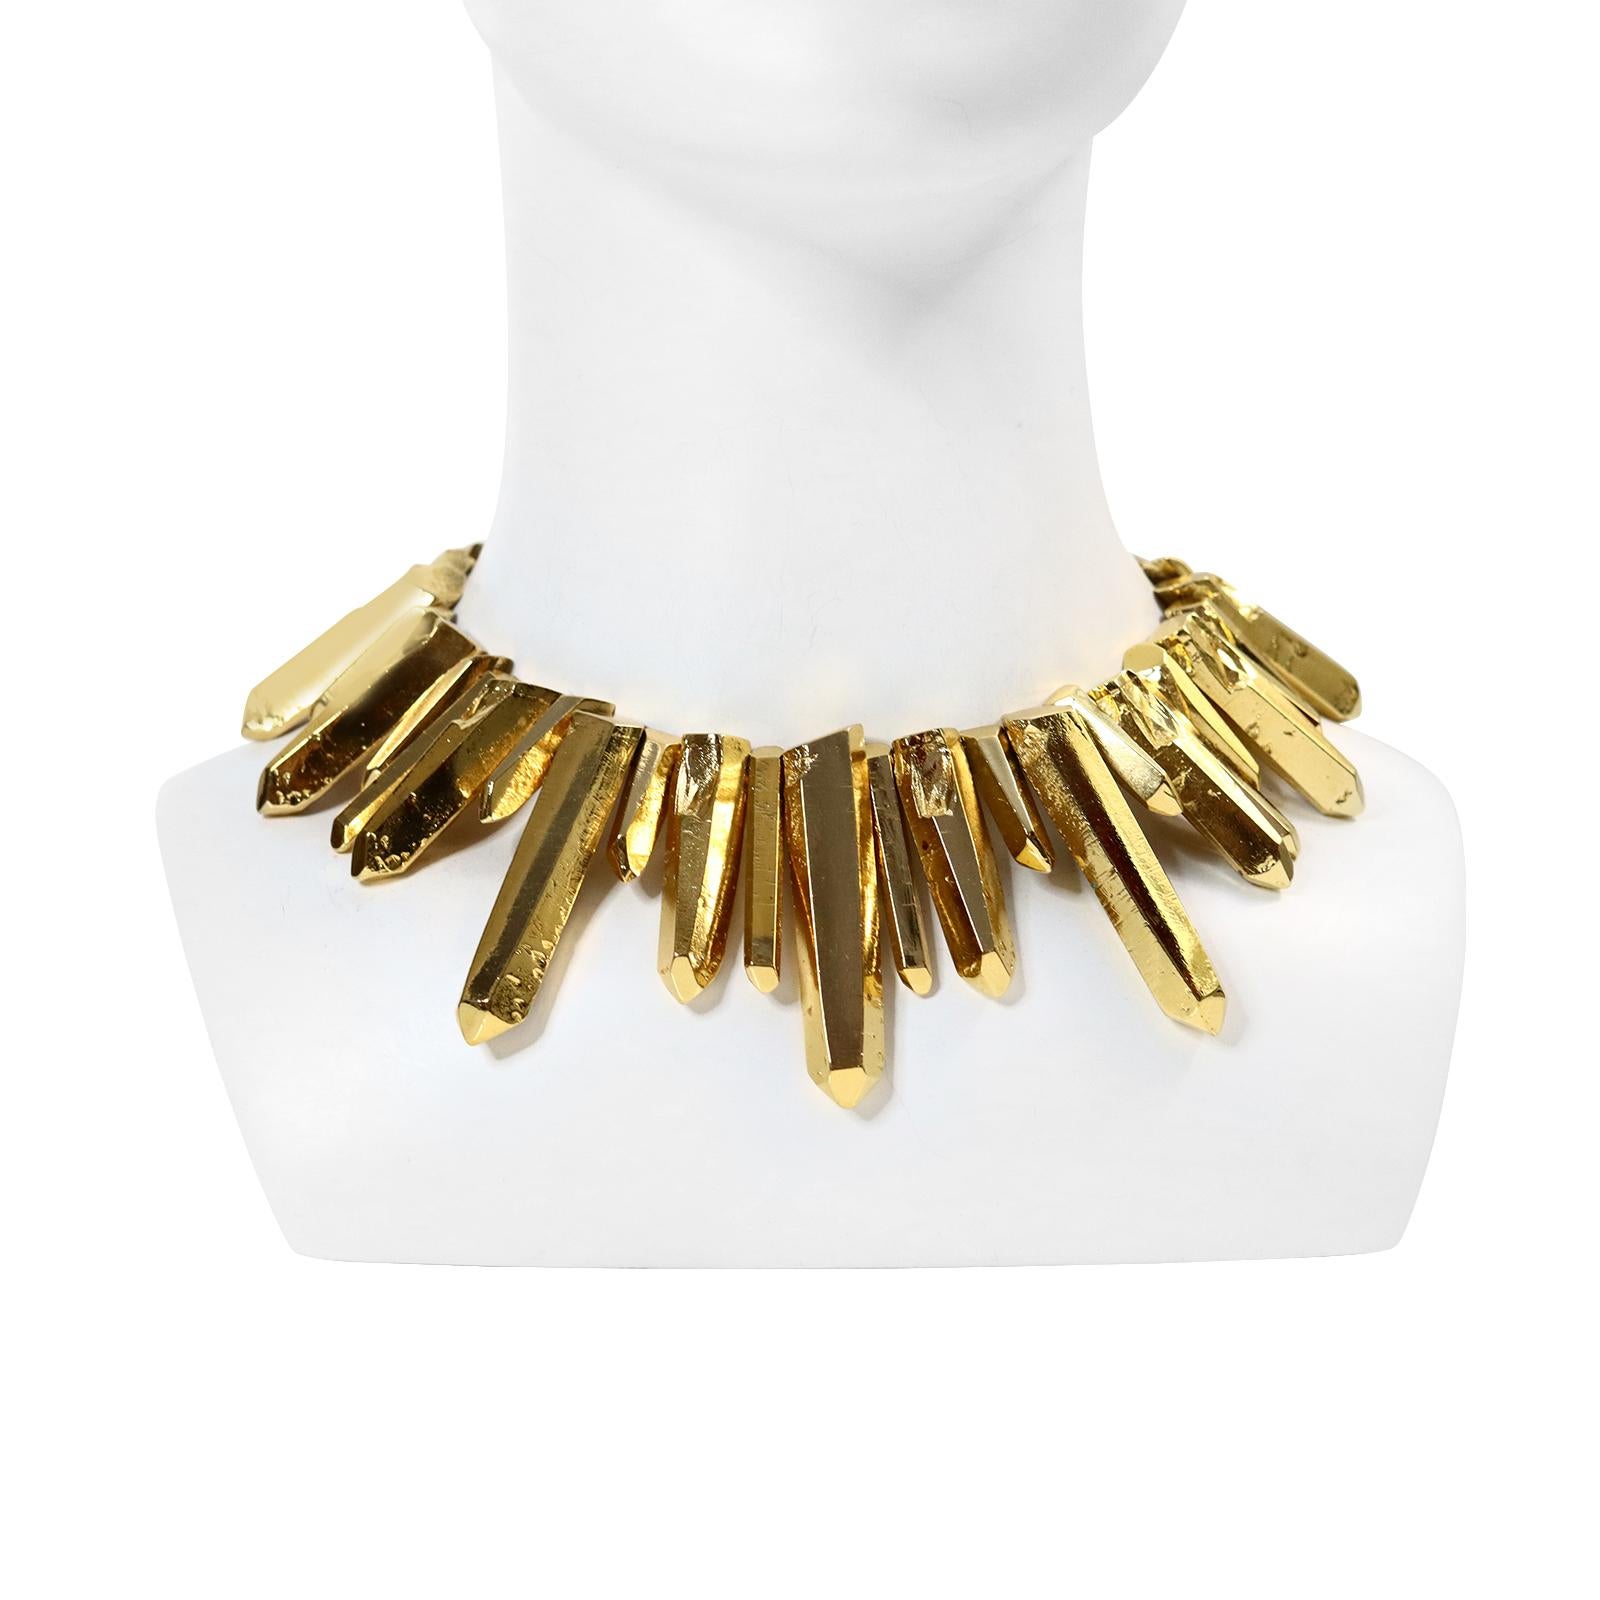 Vintage Maison Goossens Yves Saint Laurent YSL Rock Crystal Collar Heavy Necklace.  Couture at its best.  Long and Short pieces of Gold Tone Spikes.   Bars of Gold.   This necklace on is so stunning. It is heavy and substantial!